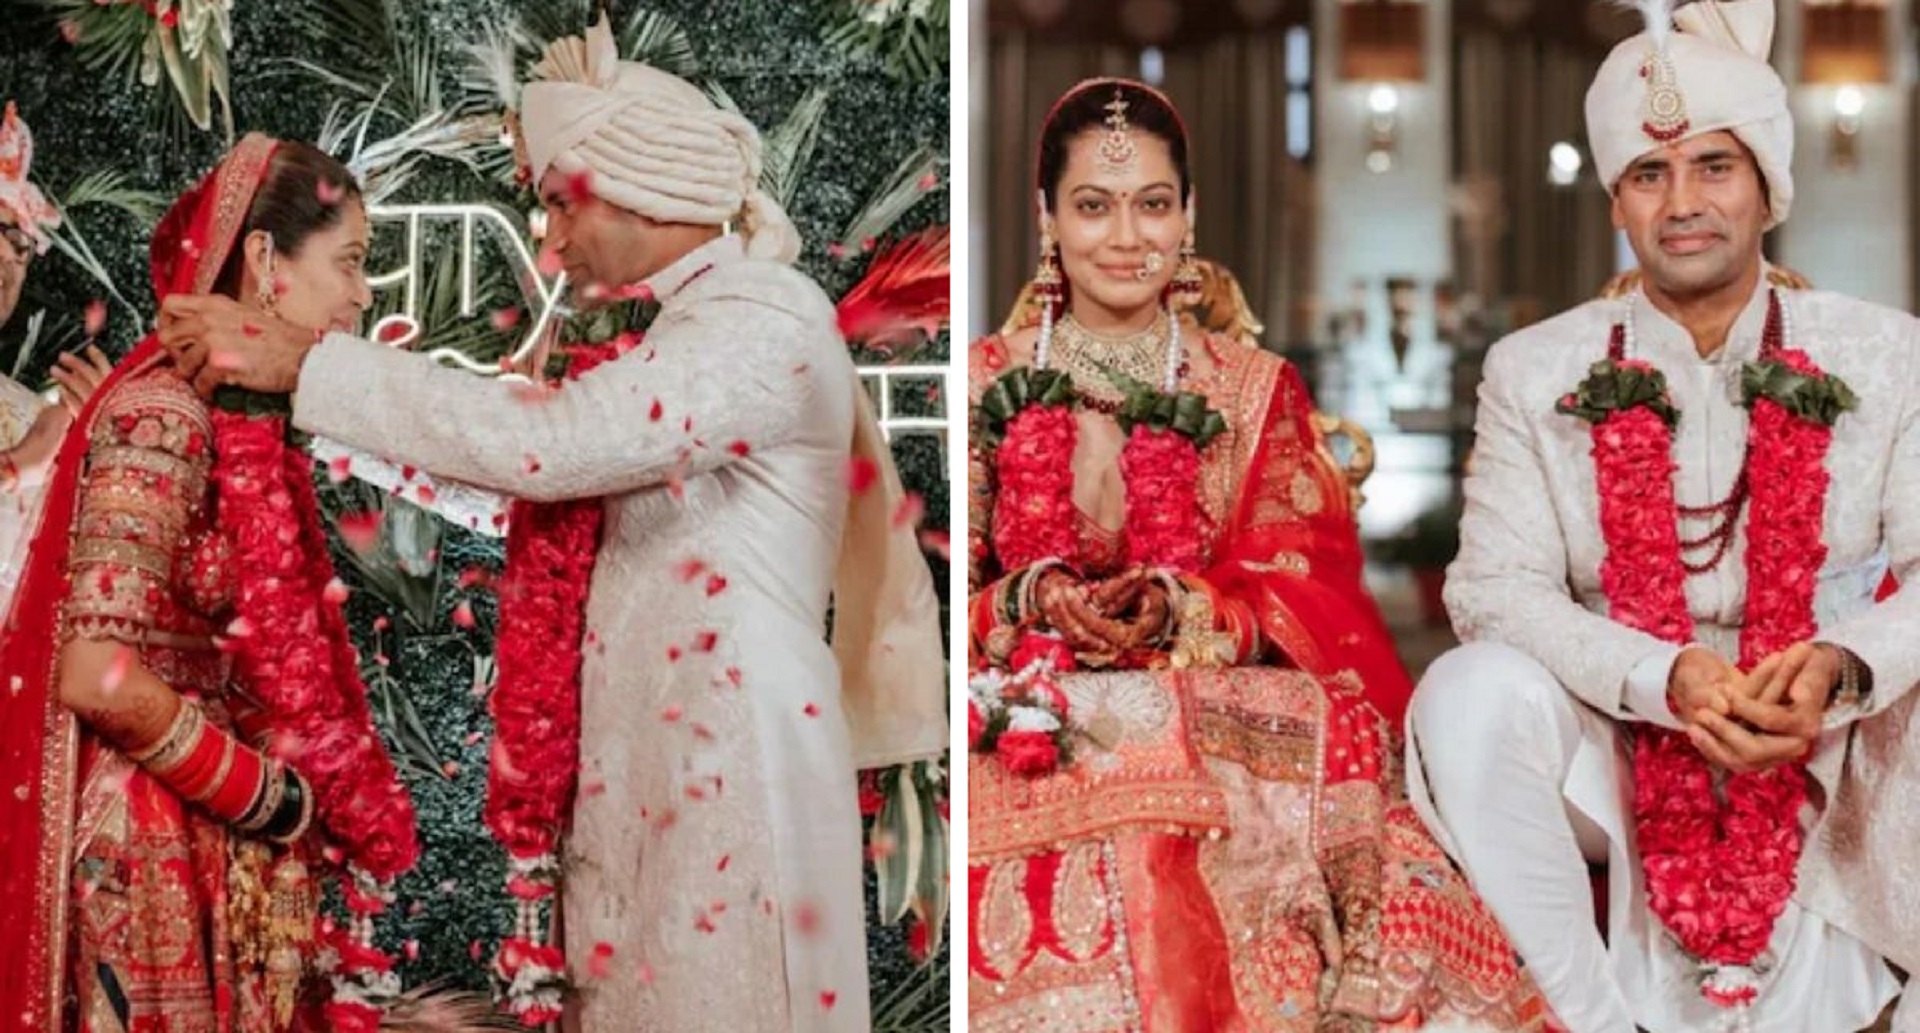 Payal Rohatgi And Sangram Singh Tie The Knot In Agra, See Pics From Their Wedding Ceremony